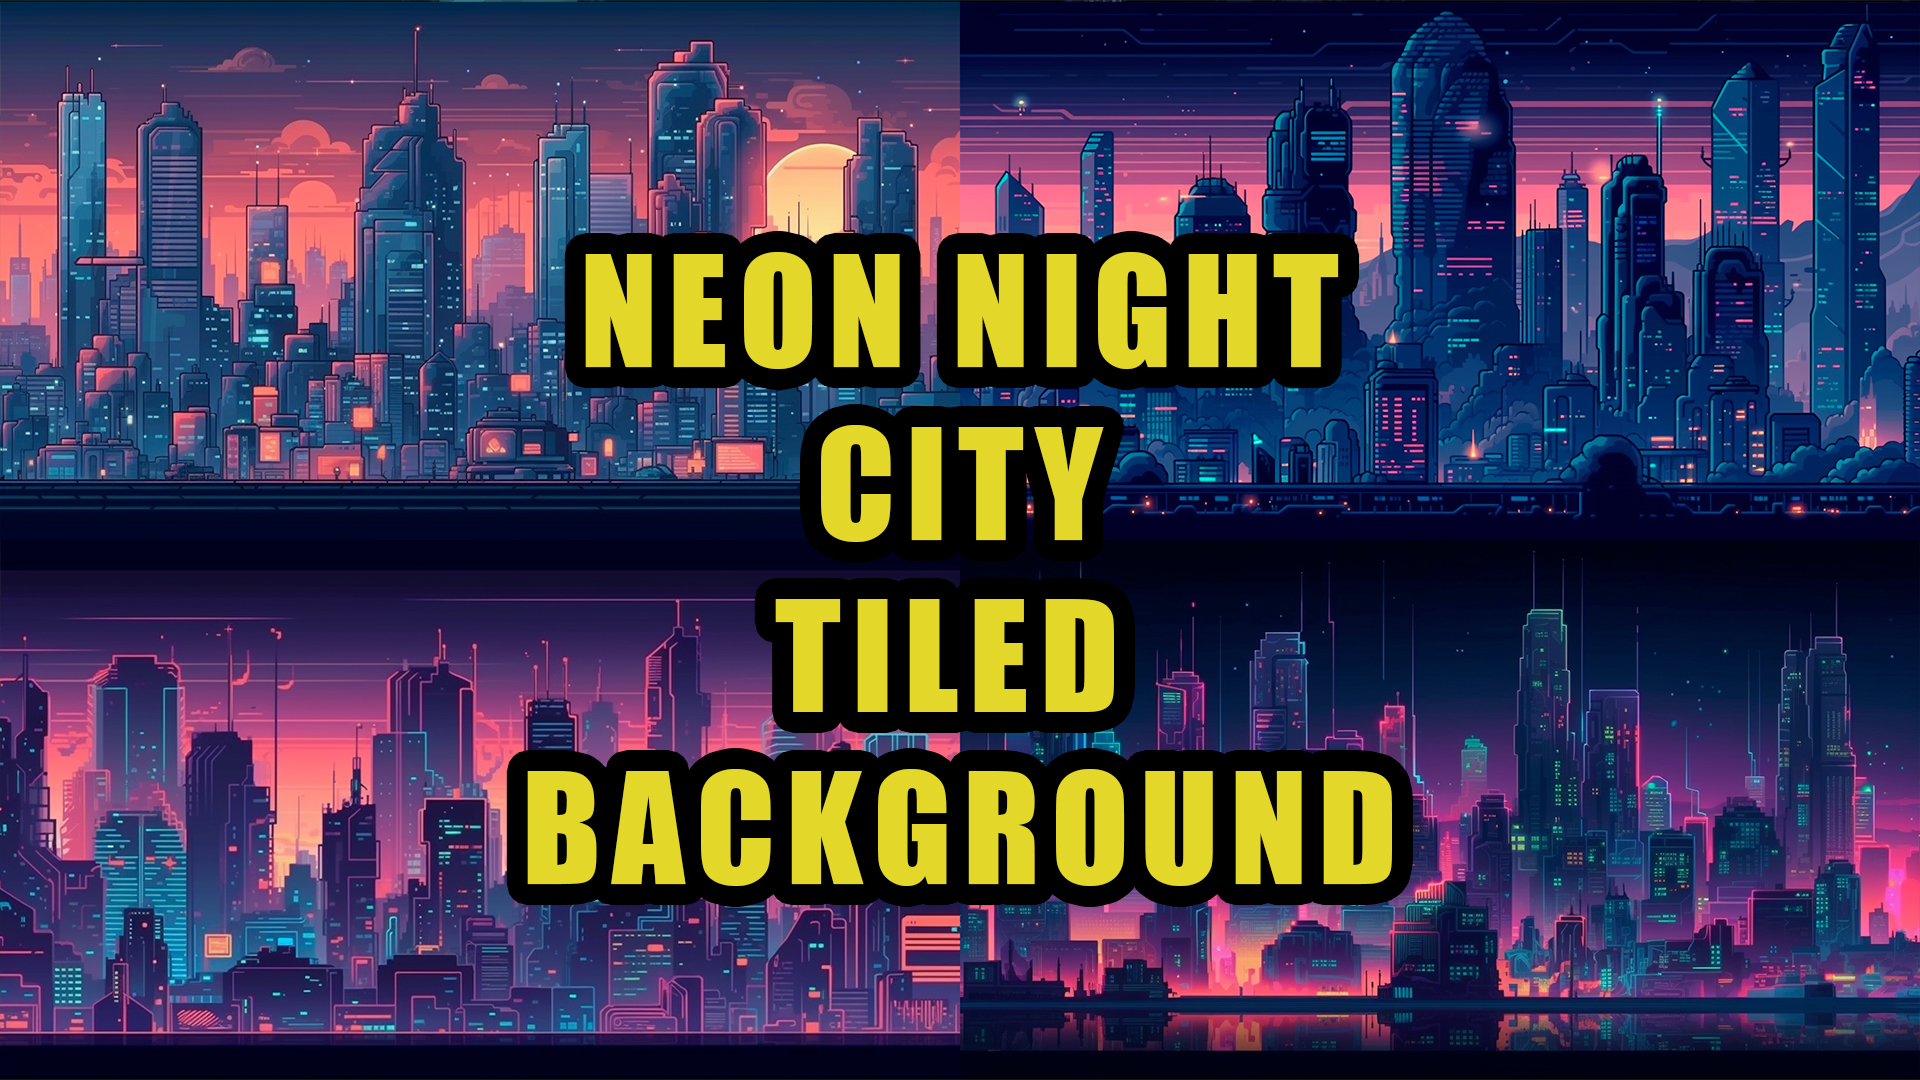 Neon Night City Tiled Background